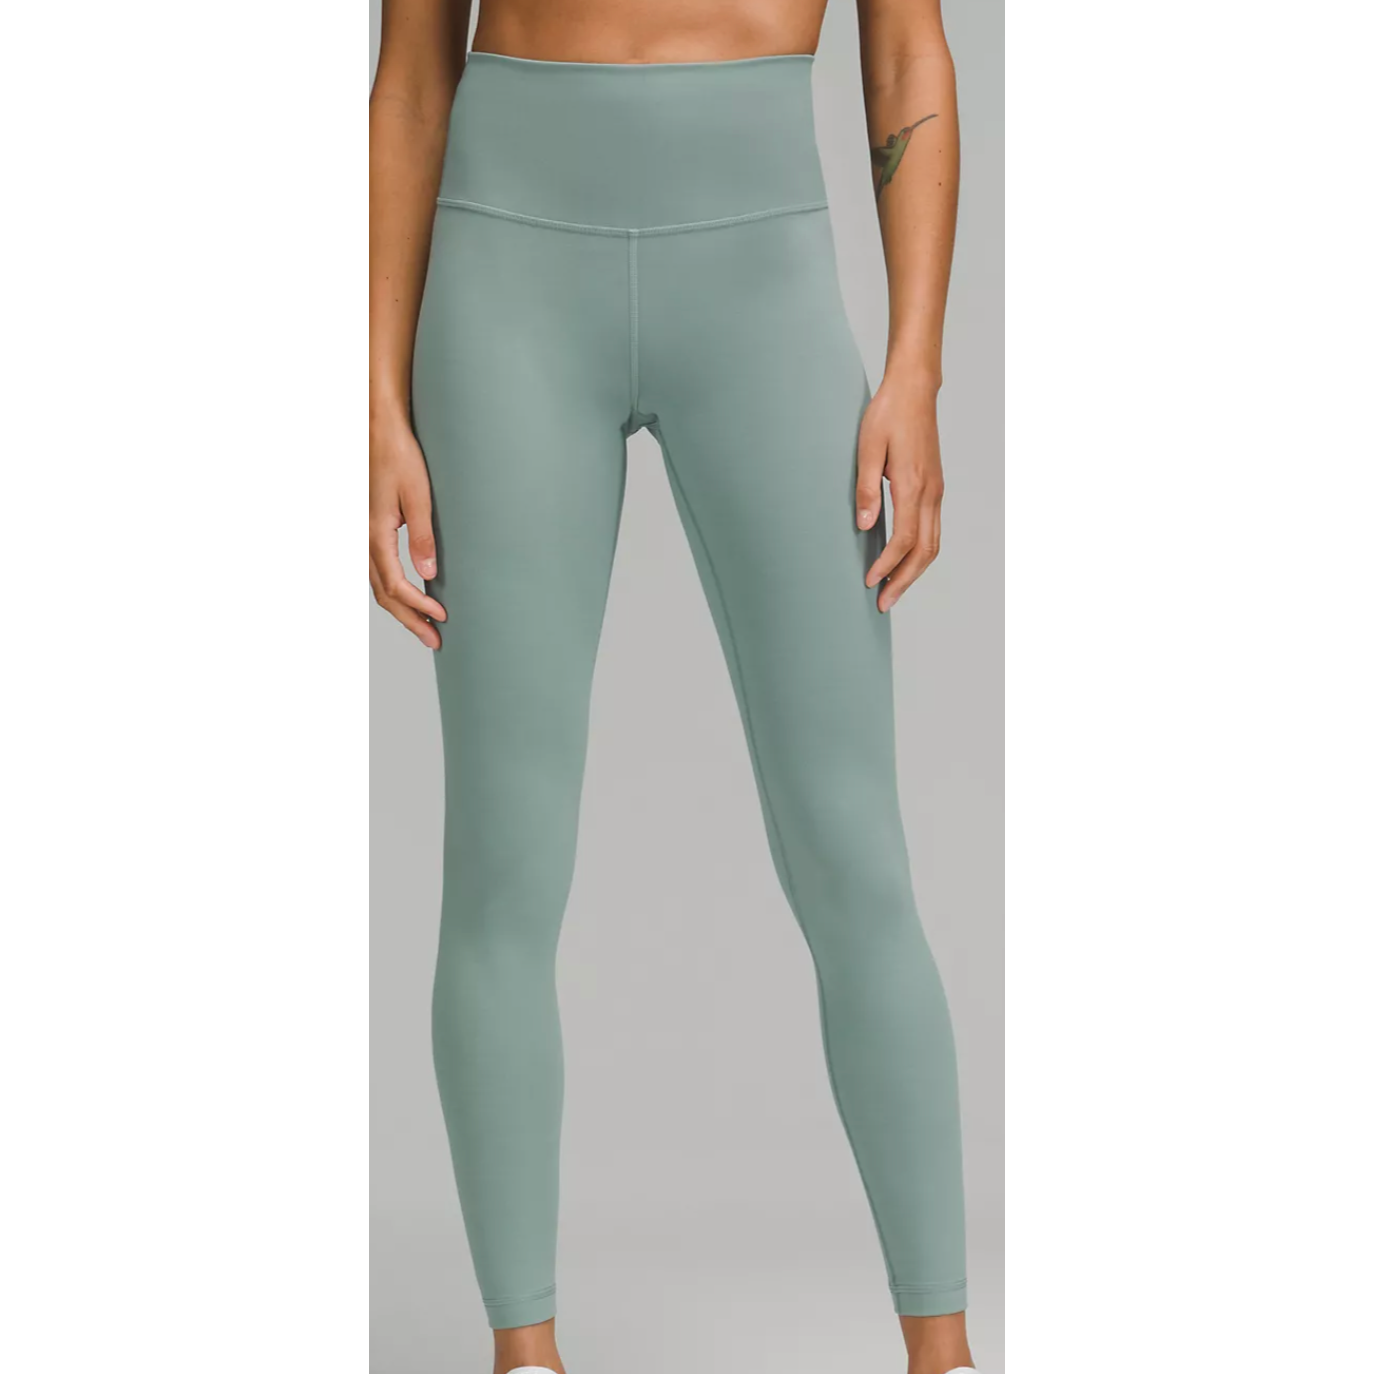 Lululemon Wunder Train HR Leggings Size 8 - $67 New With Tags - From liz